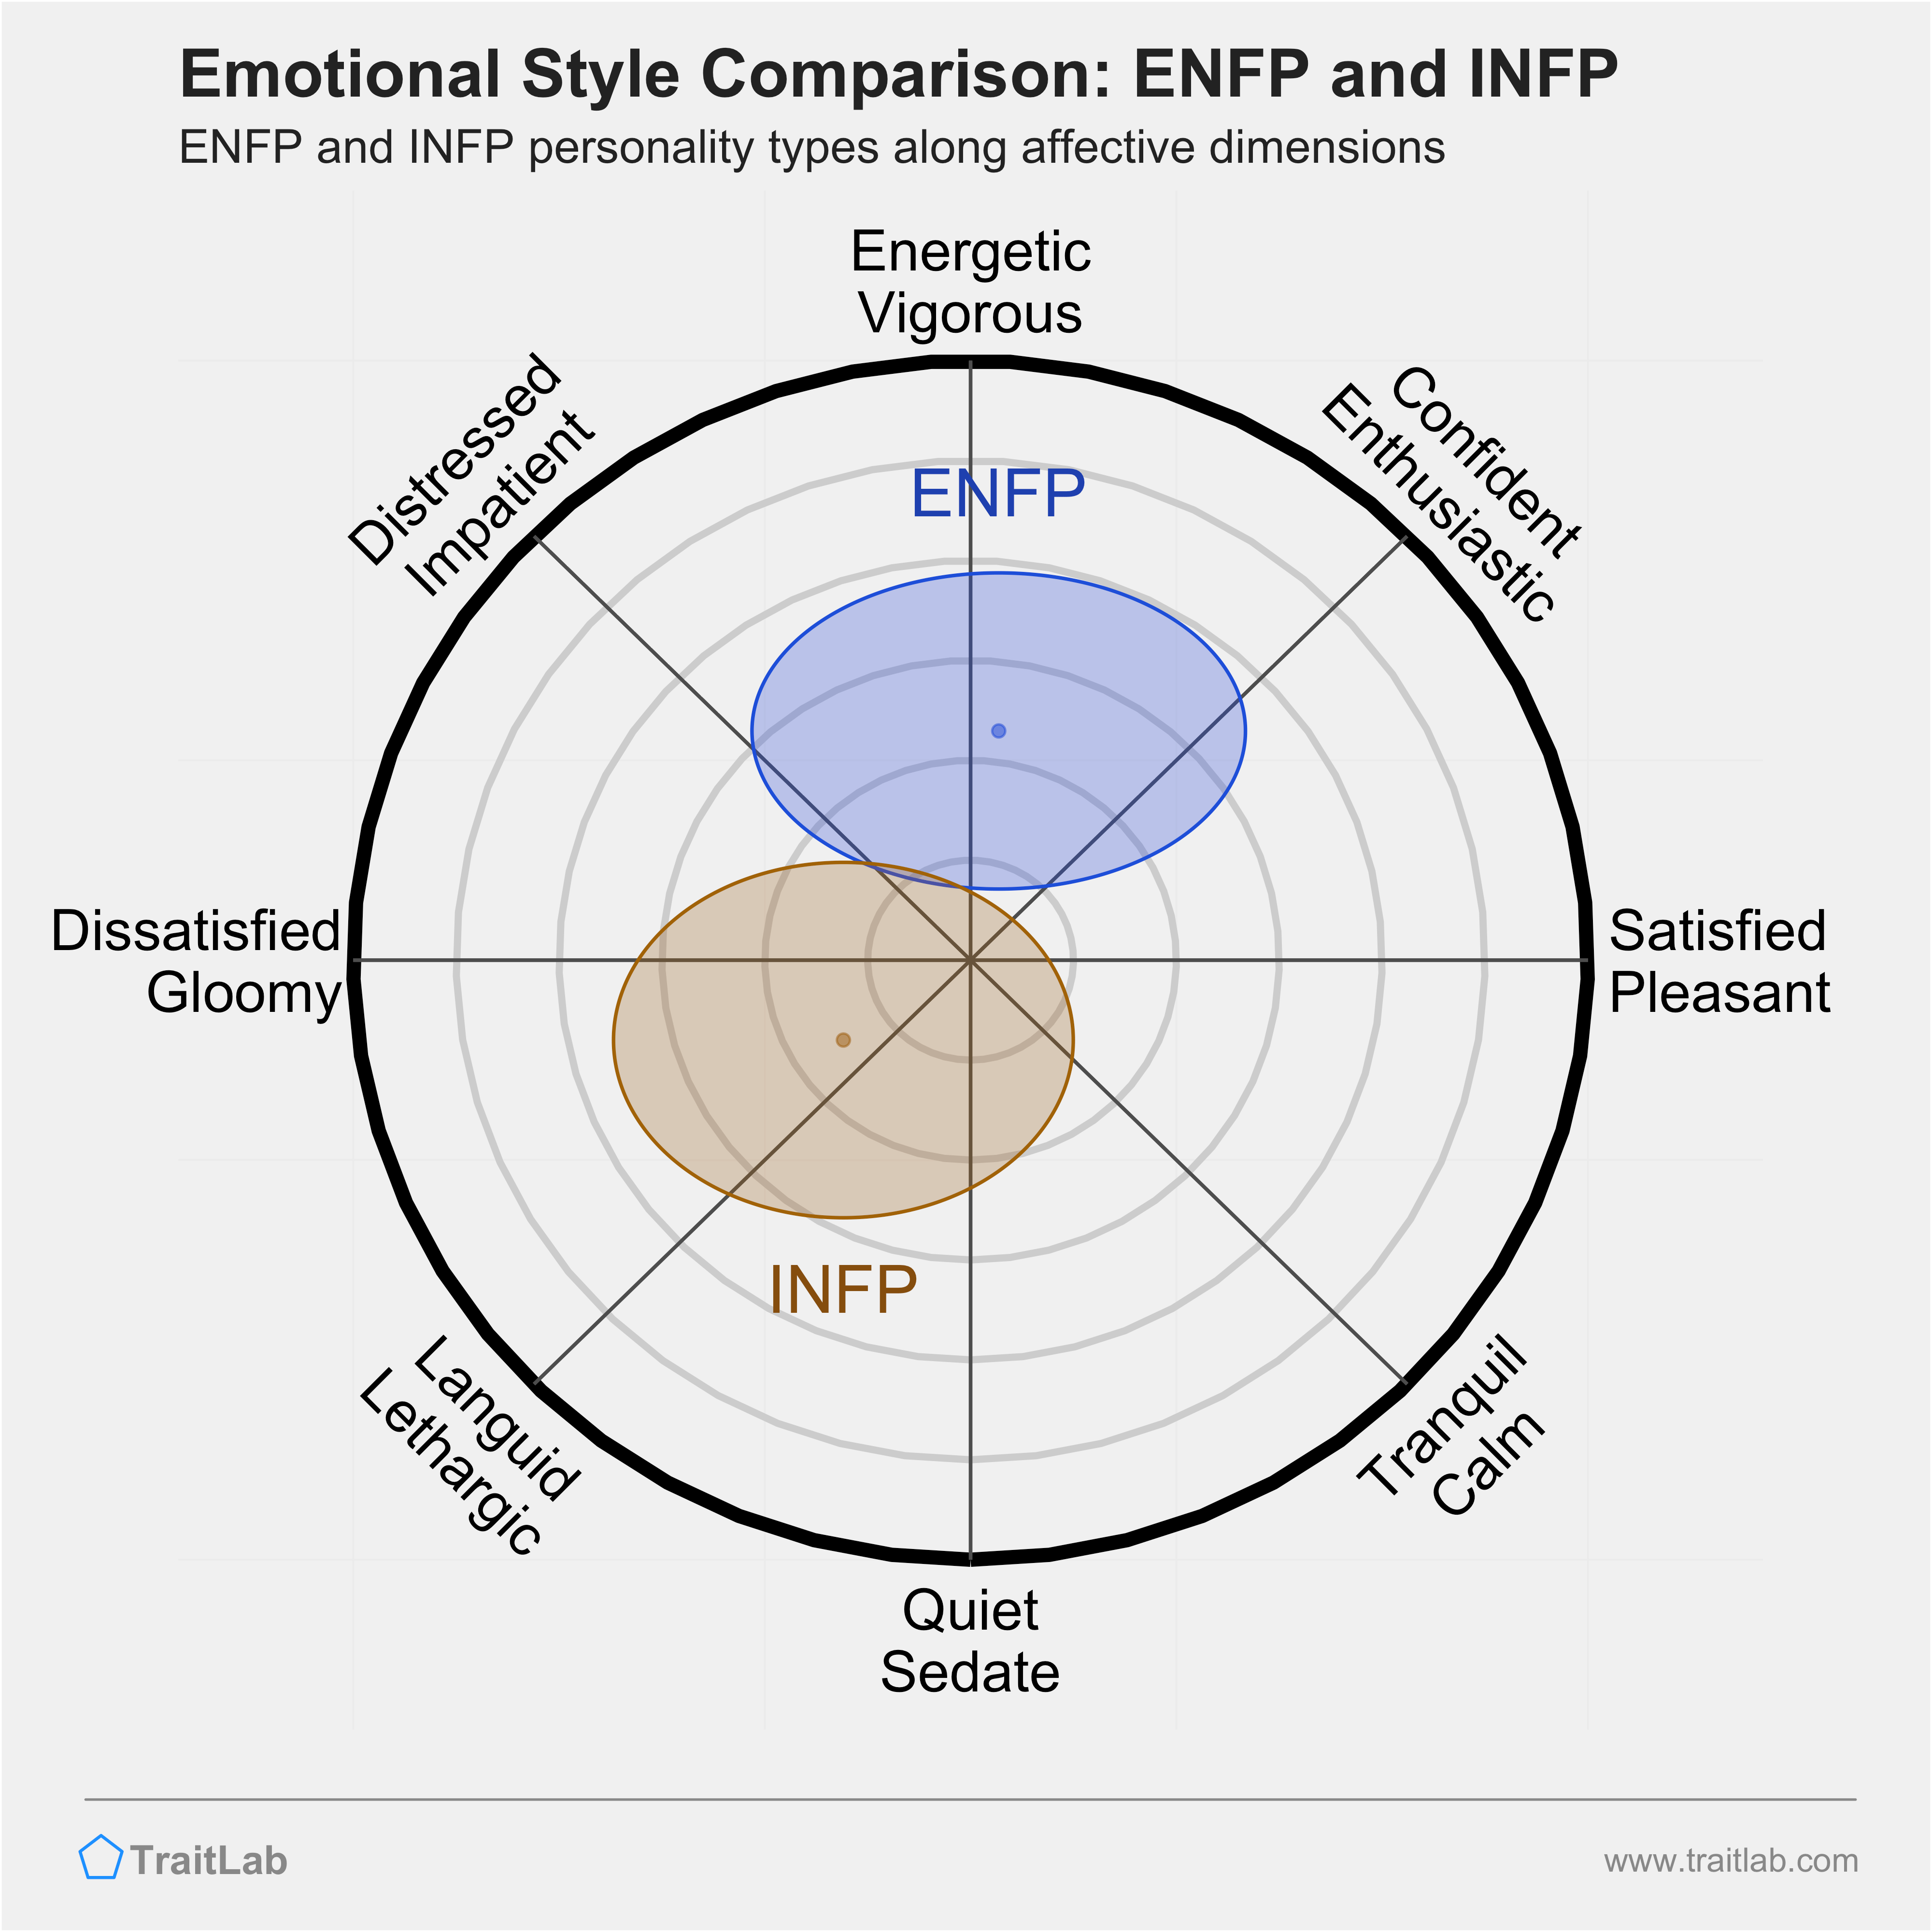 ENFP and INFP comparison across emotional (affective) dimensions